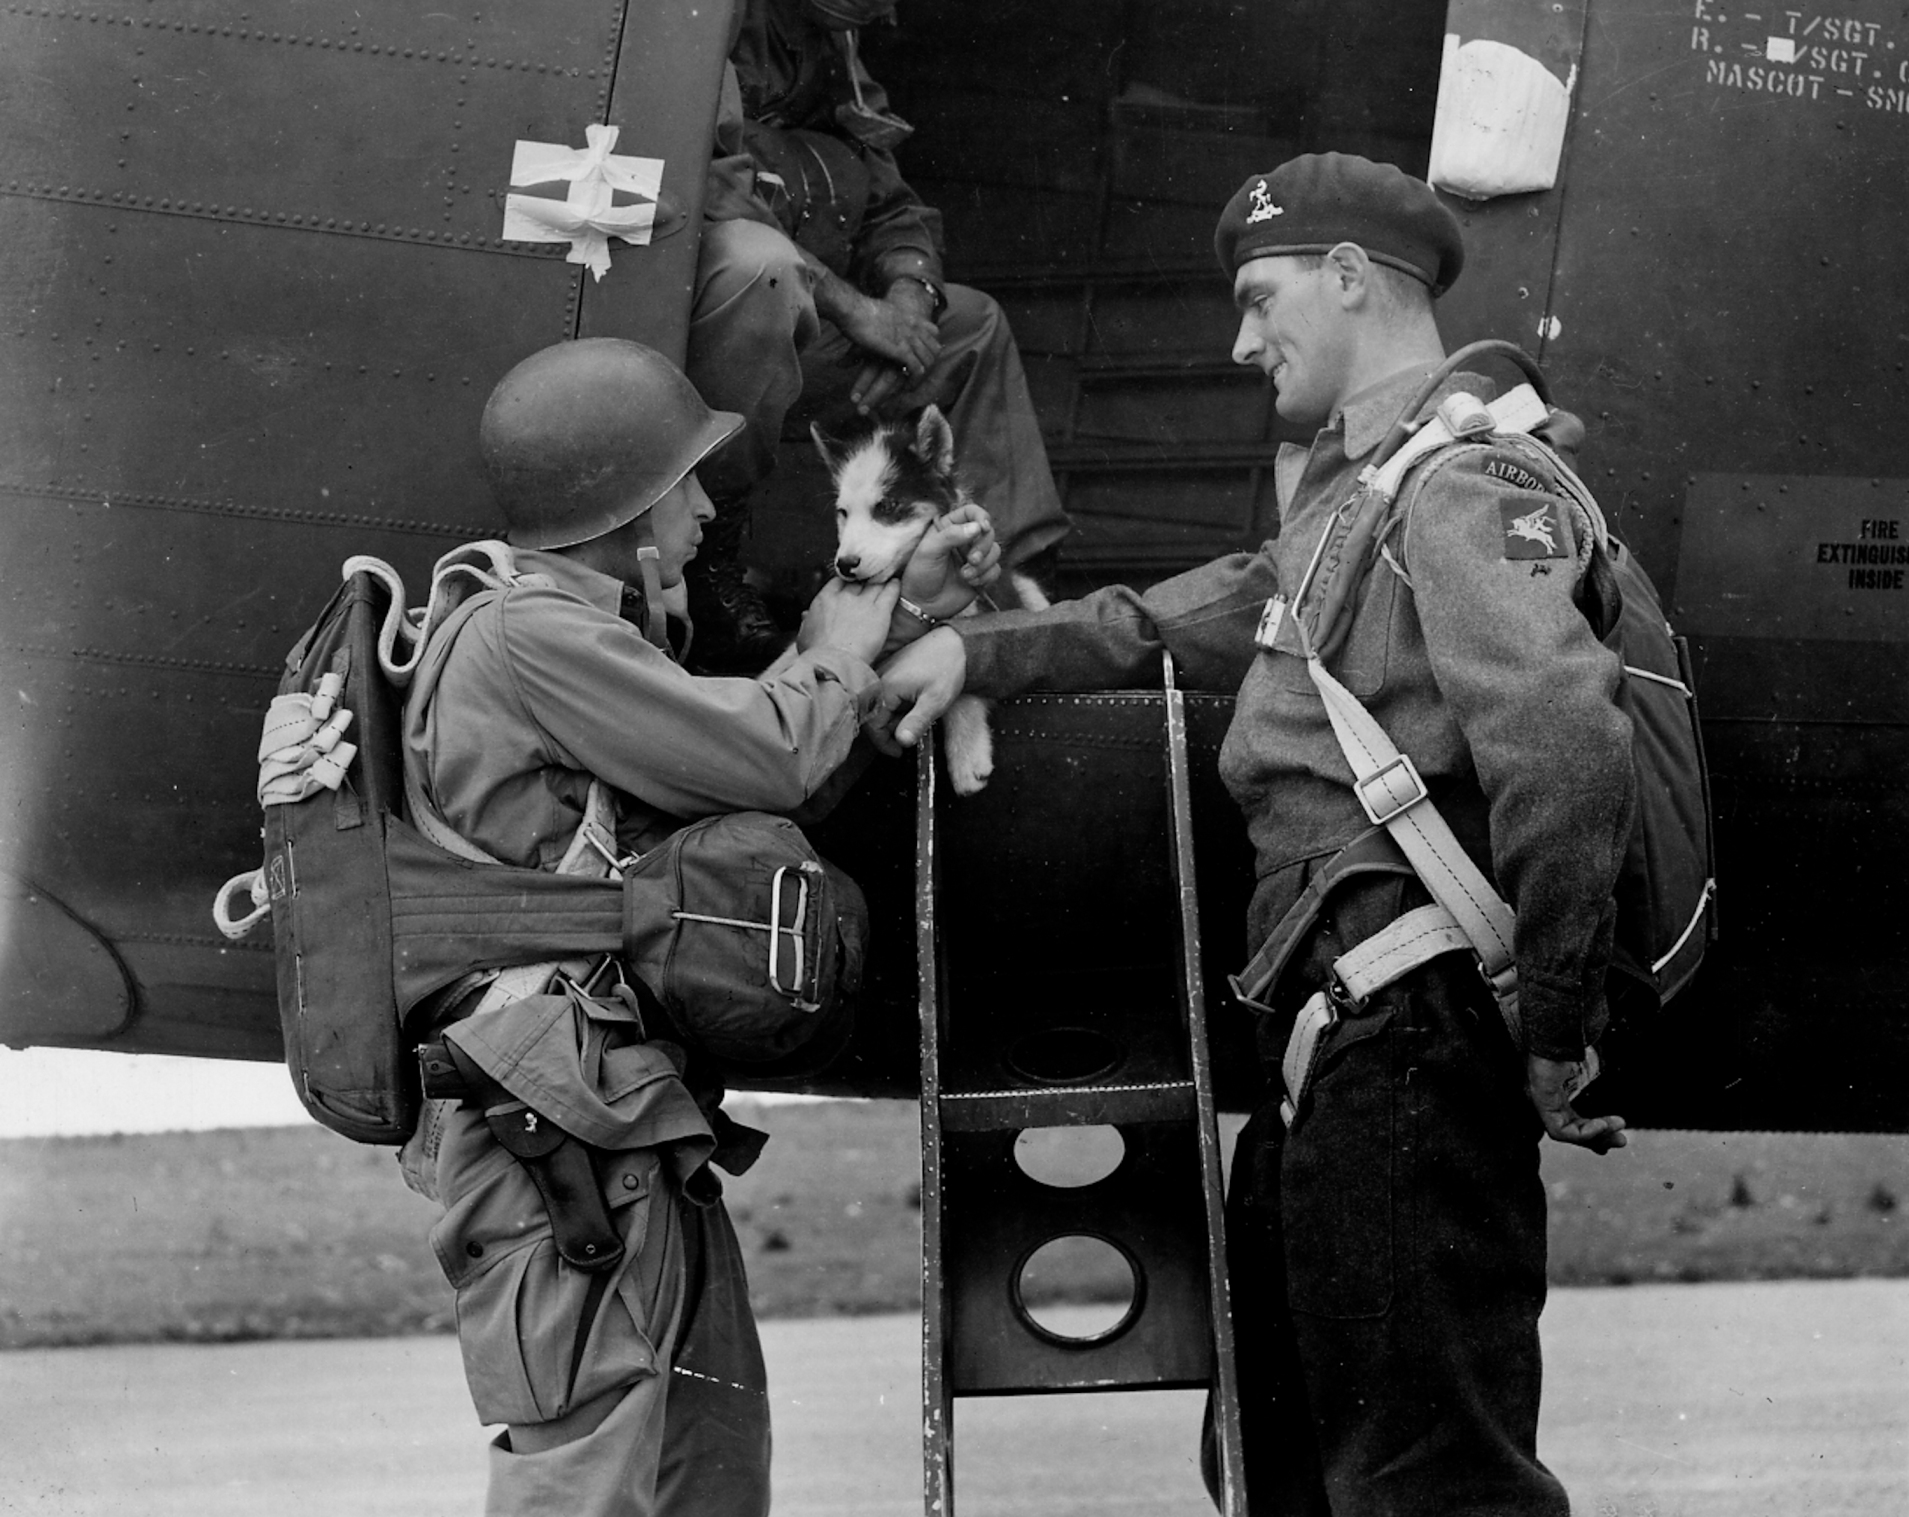 British Series WWII British Paratrooper with US Airborne Officer and Dog Mascot DDay Drop 060544 (1 of 1)